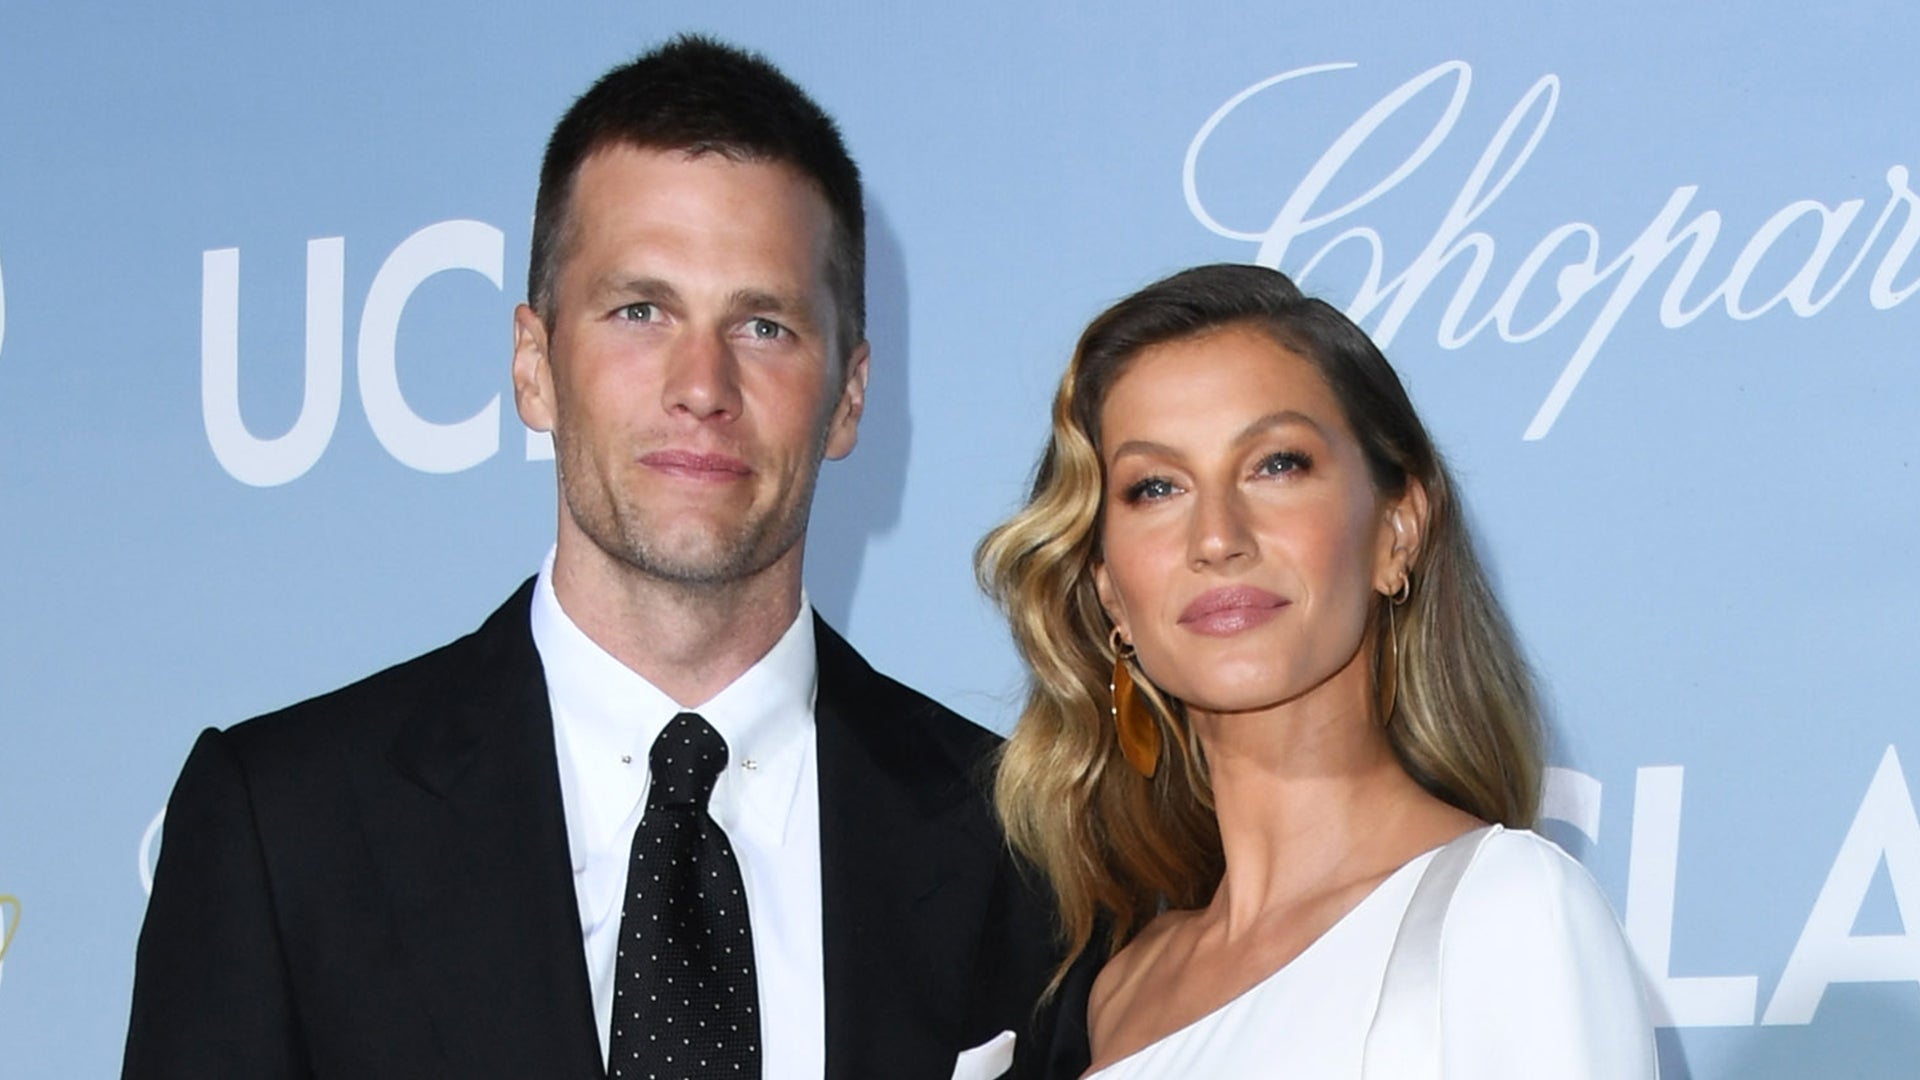 Tom Brady Is ‘Extremely Hurt’ and Hopes to Reconcile With Gisele Bunchen (Source)